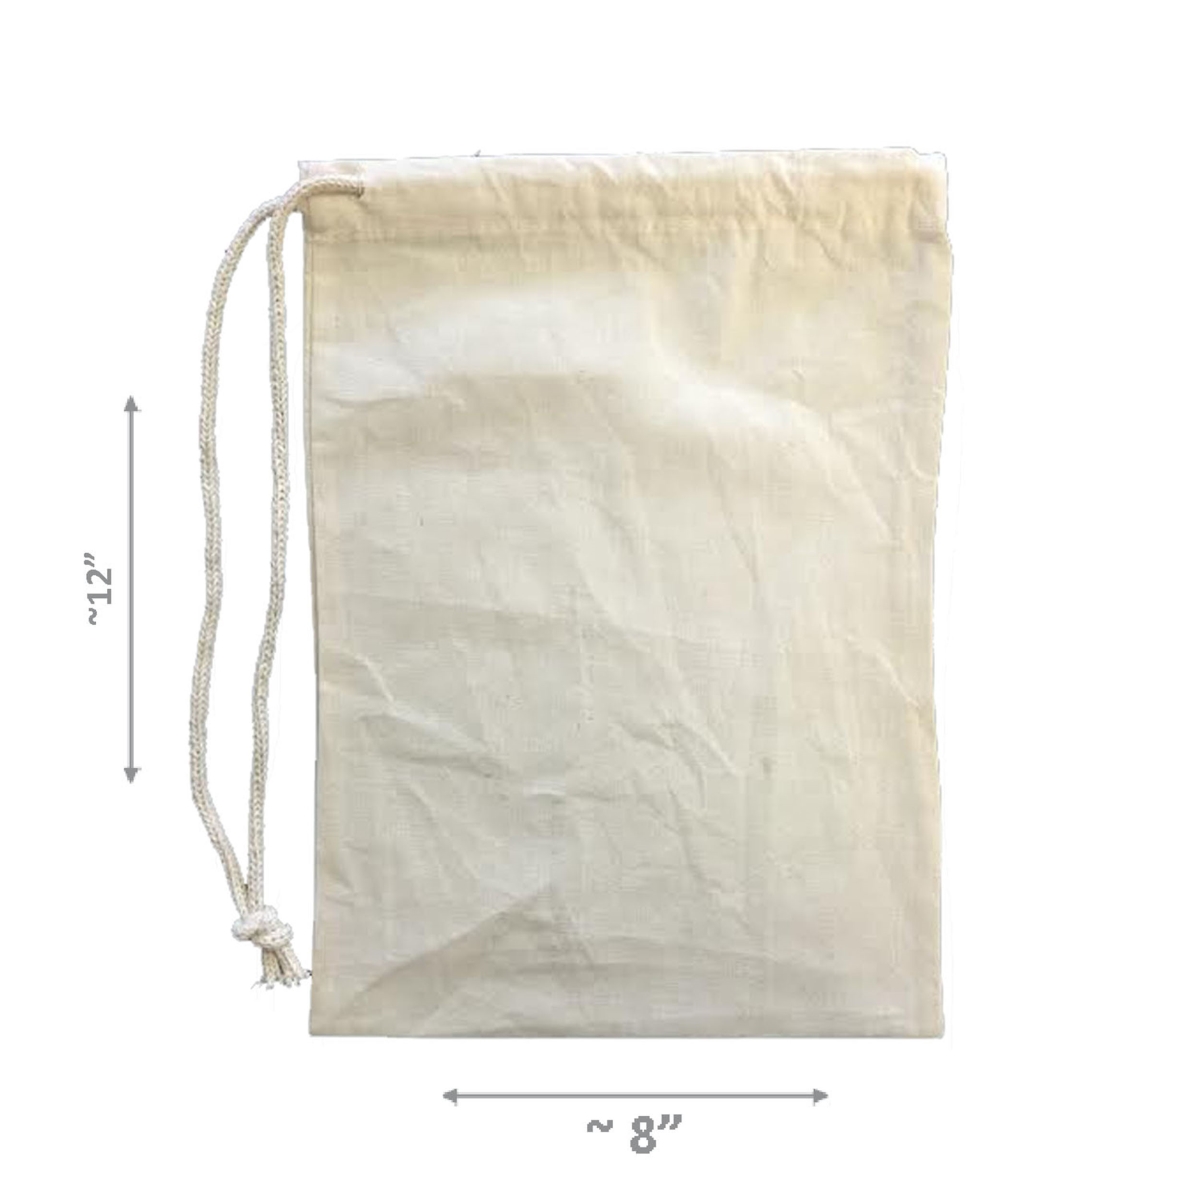 Muslinbag8x12-pack25 100 Percent Cotton Durable Drawstring Muslin Produce Storage Bags, Natural - 8 X 12 In. - Pack Of 25